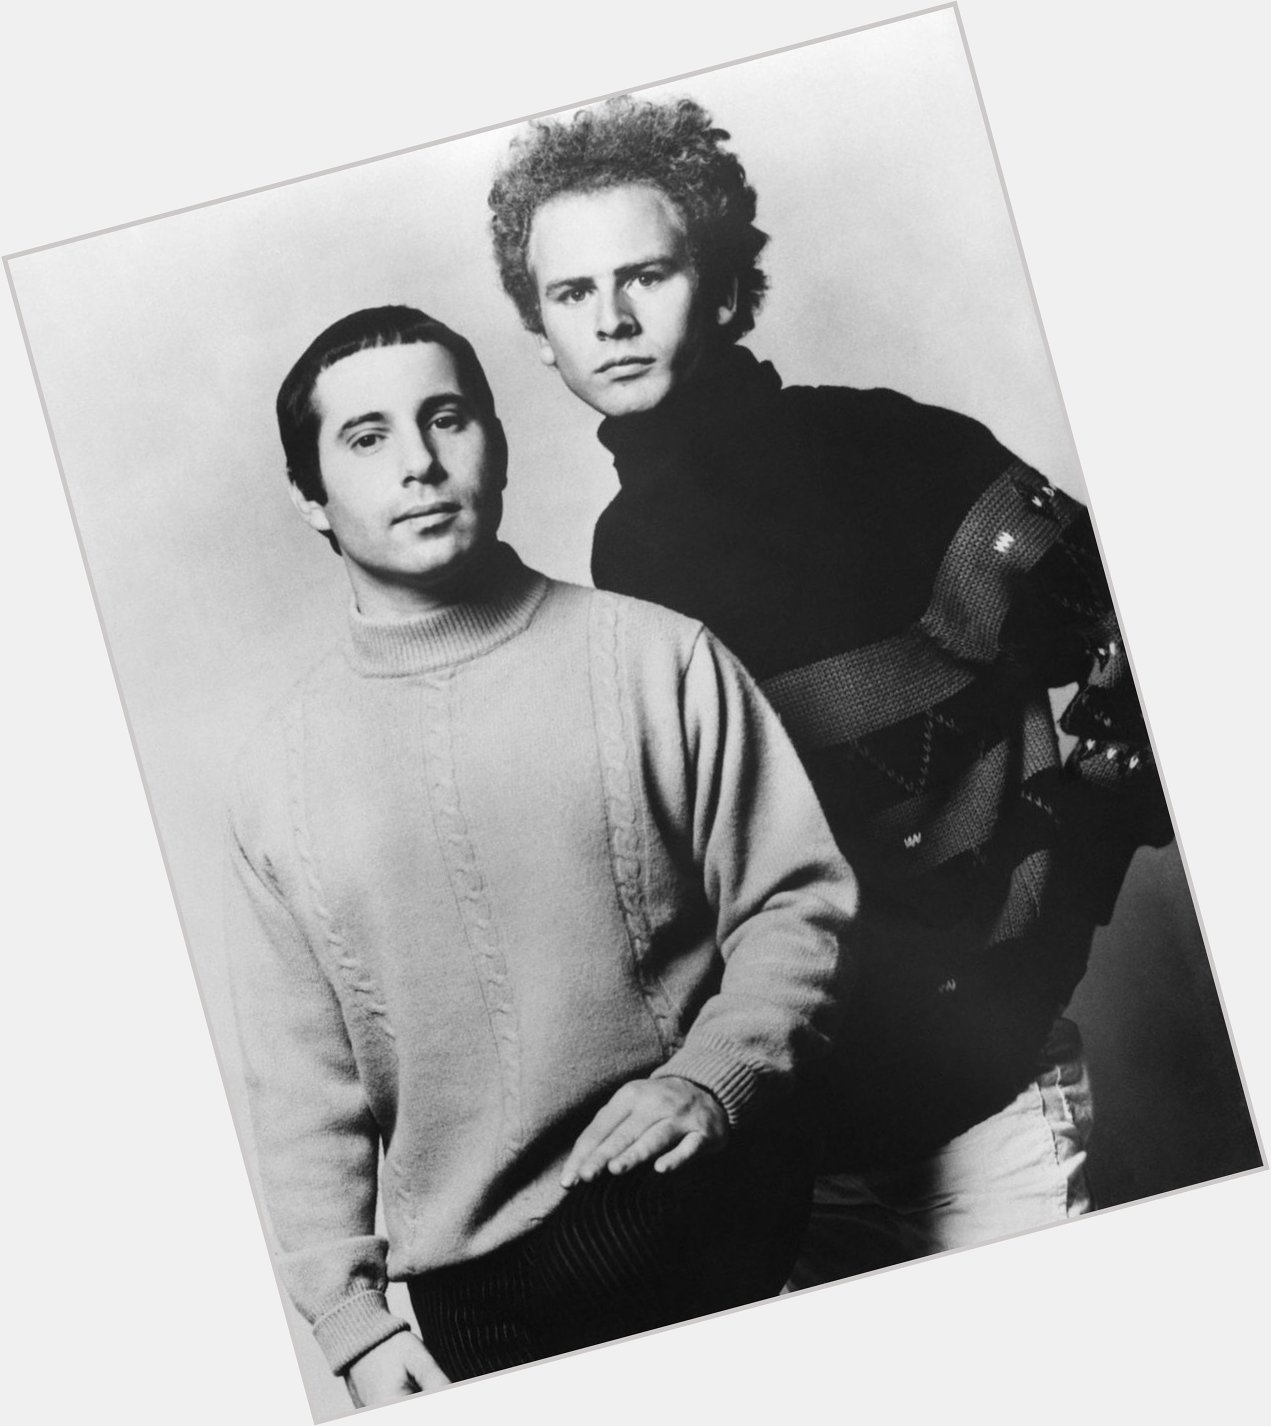 Happy 78th birthday to legendary singer Art Garfunkel, one of the greatest voices of all time. 